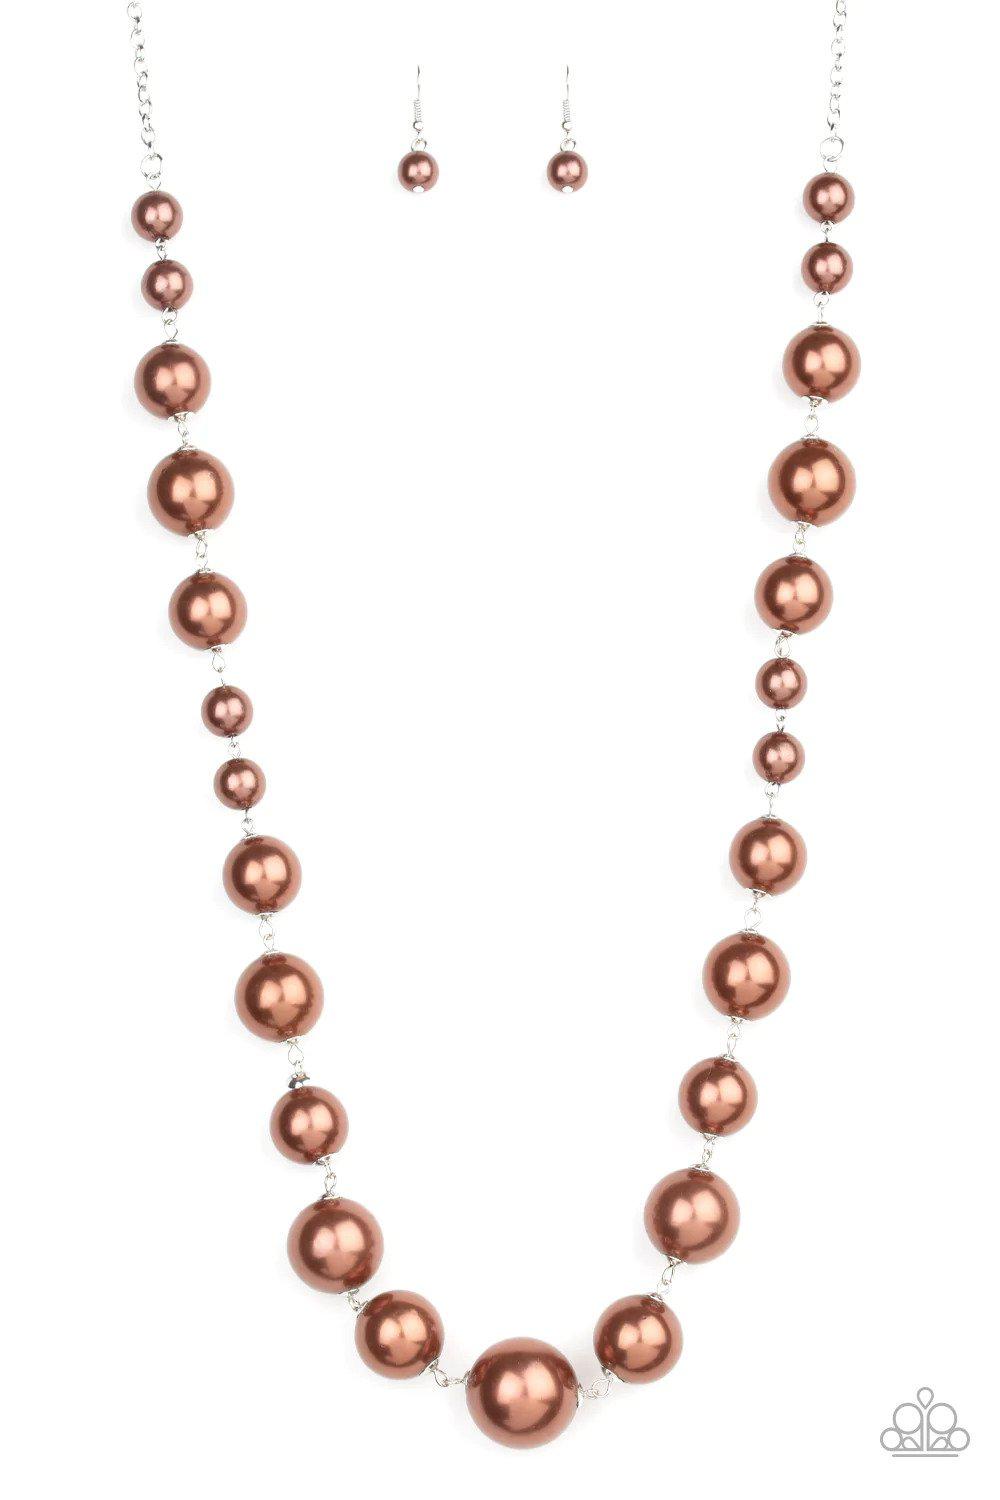 Pearl Prodigy Brown Necklace - Paparazzi Accessories- lightbox - CarasShop.com - $5 Jewelry by Cara Jewels